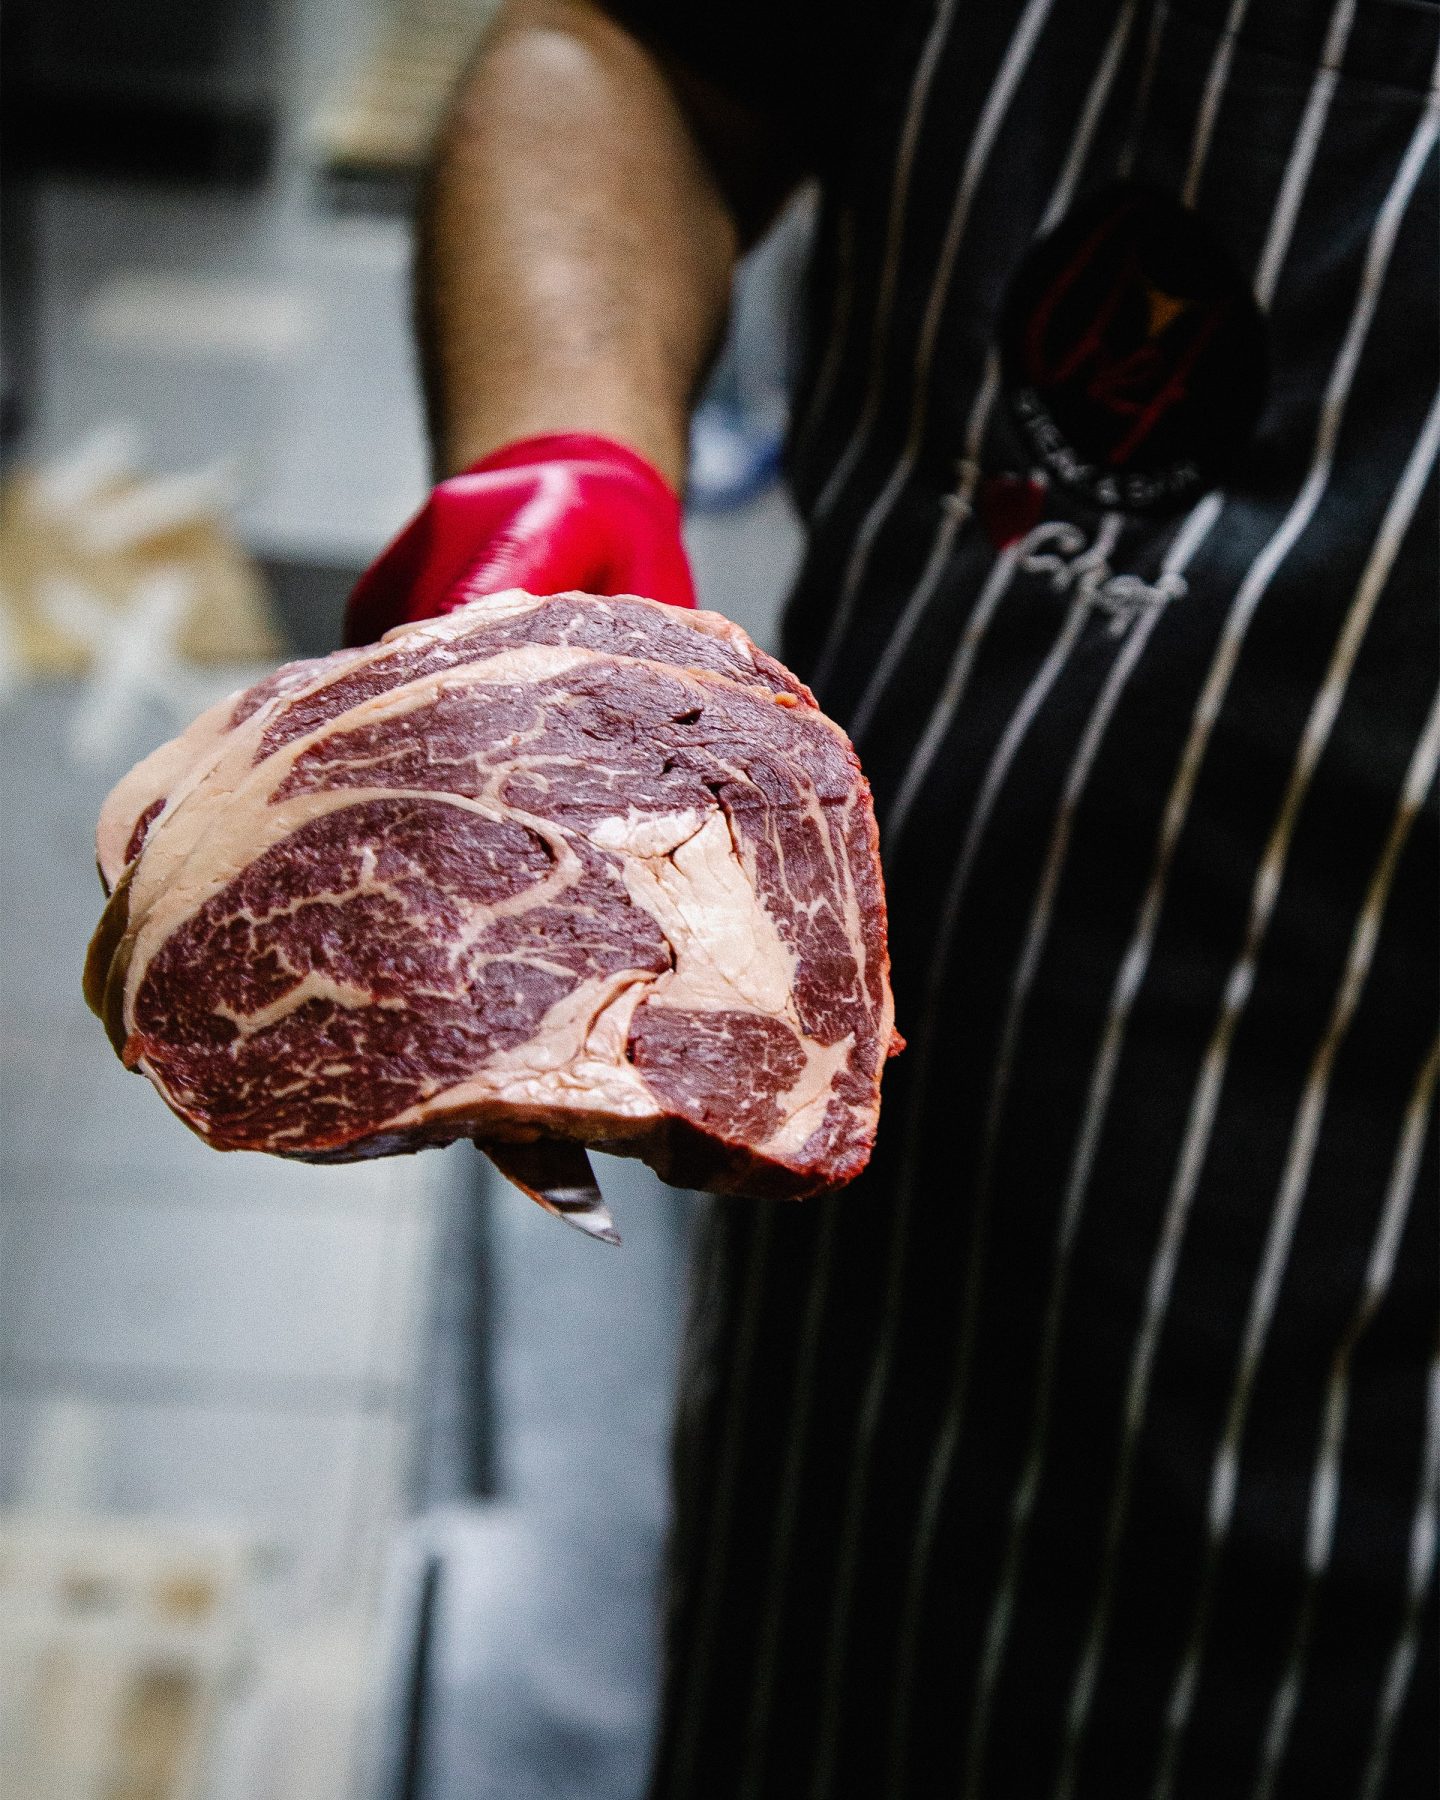 Best foodie subscription boxes: a butcher holding a cut of beef on a knife